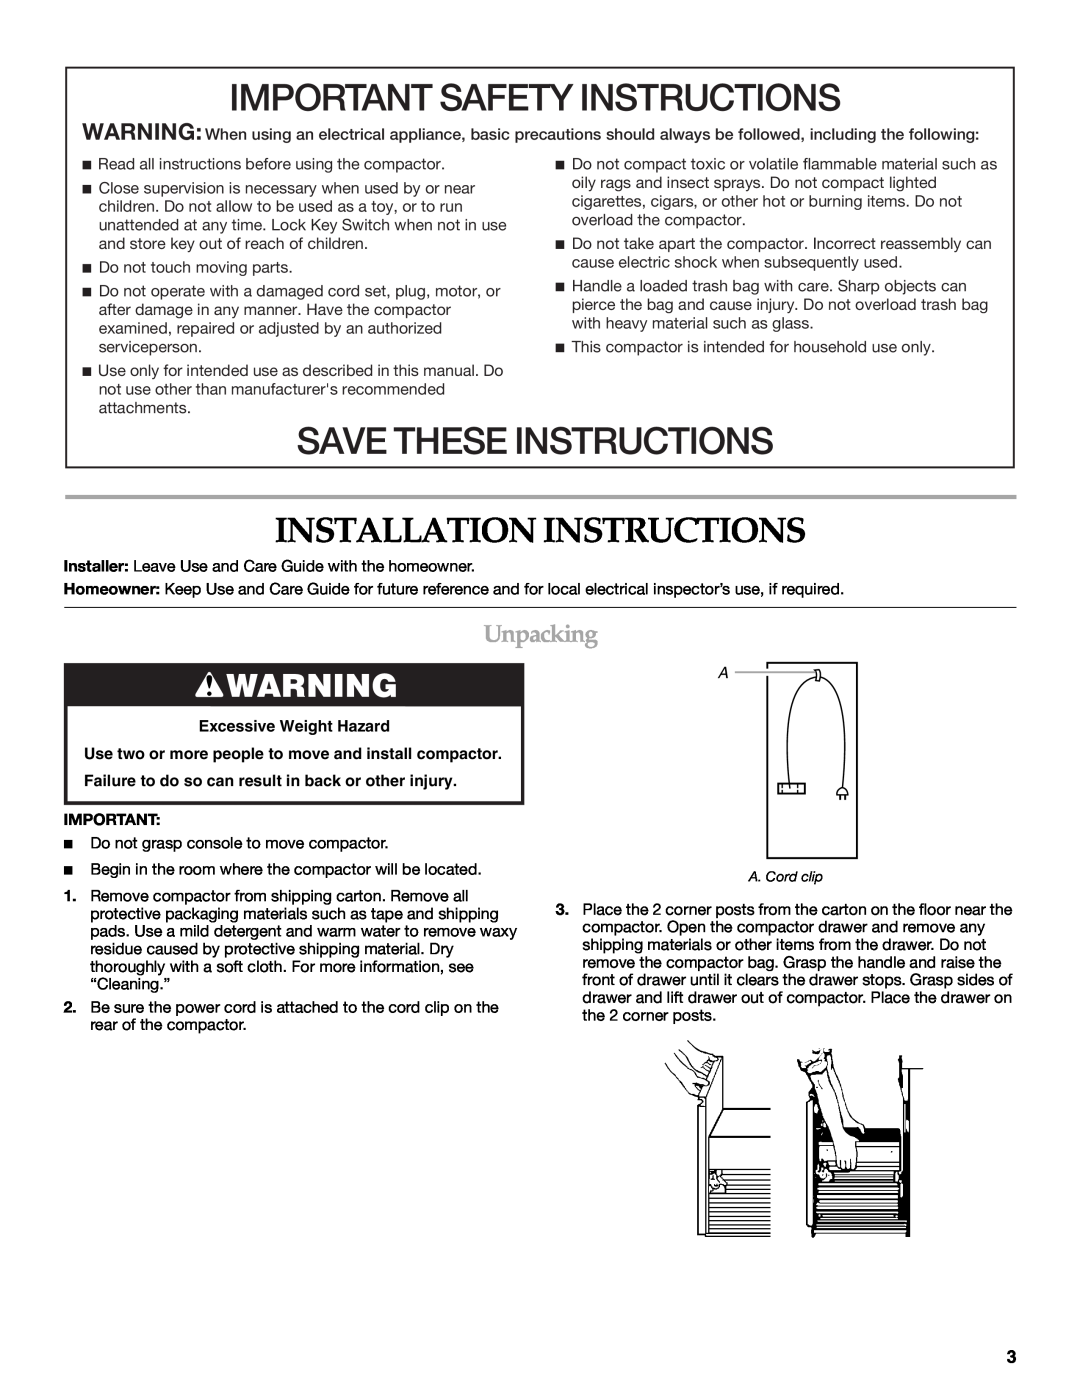 KitchenAid 9872215B manual Installation Instructions, Unpacking, Excessive Weight Hazard, Important Safety Instructions 